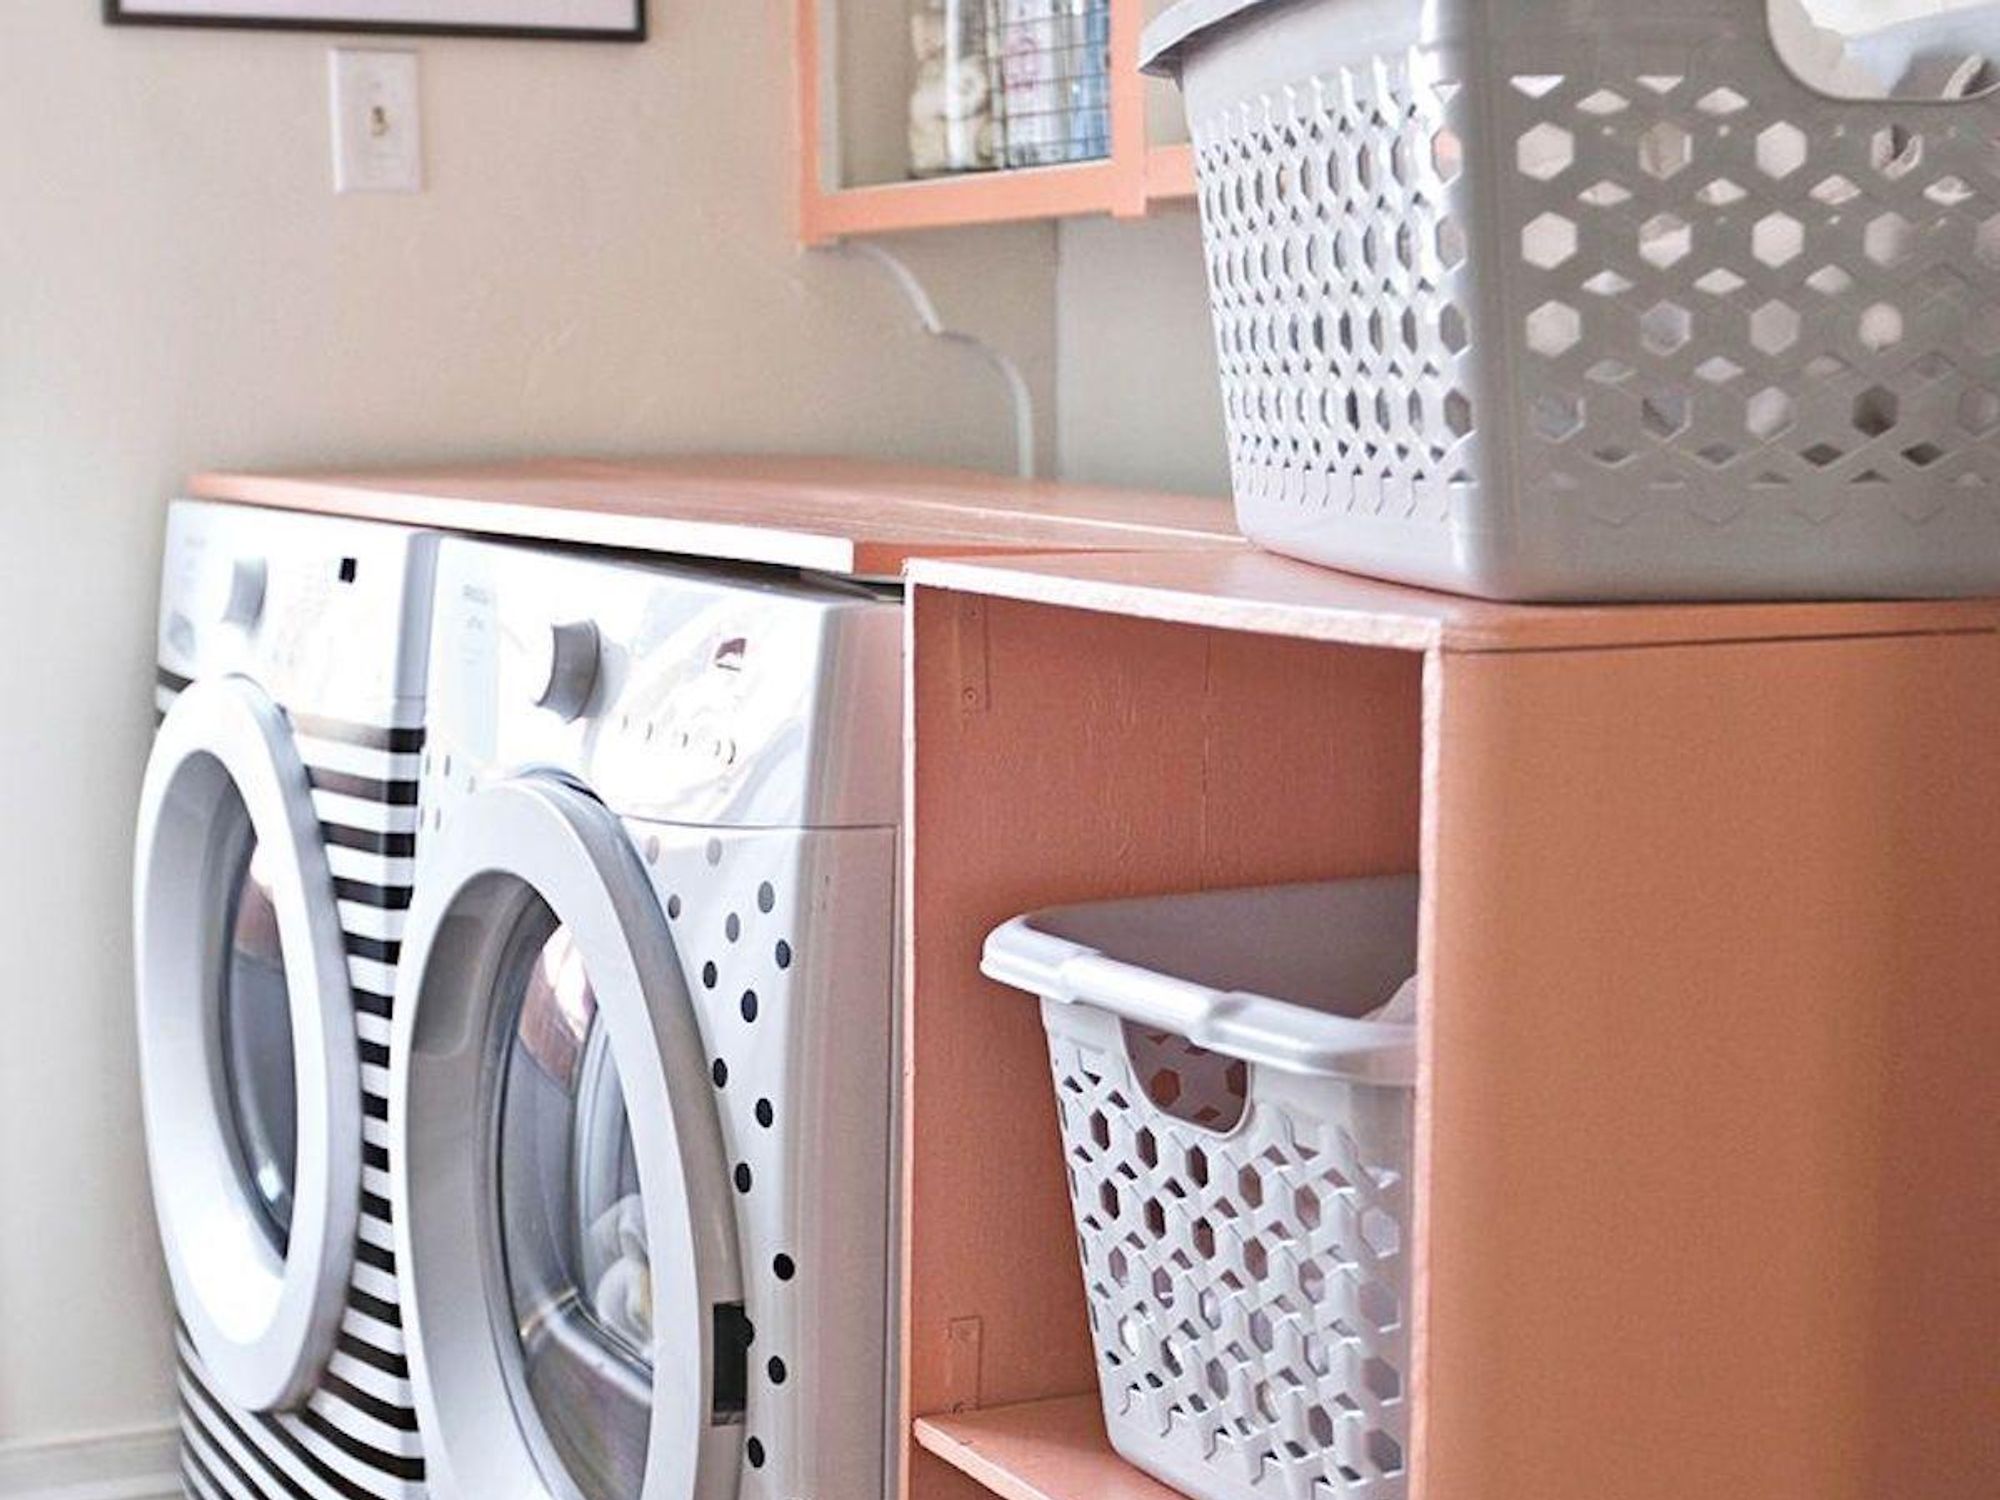 https://www.brit.co/media-library/laundry-organization-ideas-for-small-laundry-rooms.jpg?id=33006580&width=2000&height=1500&coordinates=0%2C307%2C0%2C307